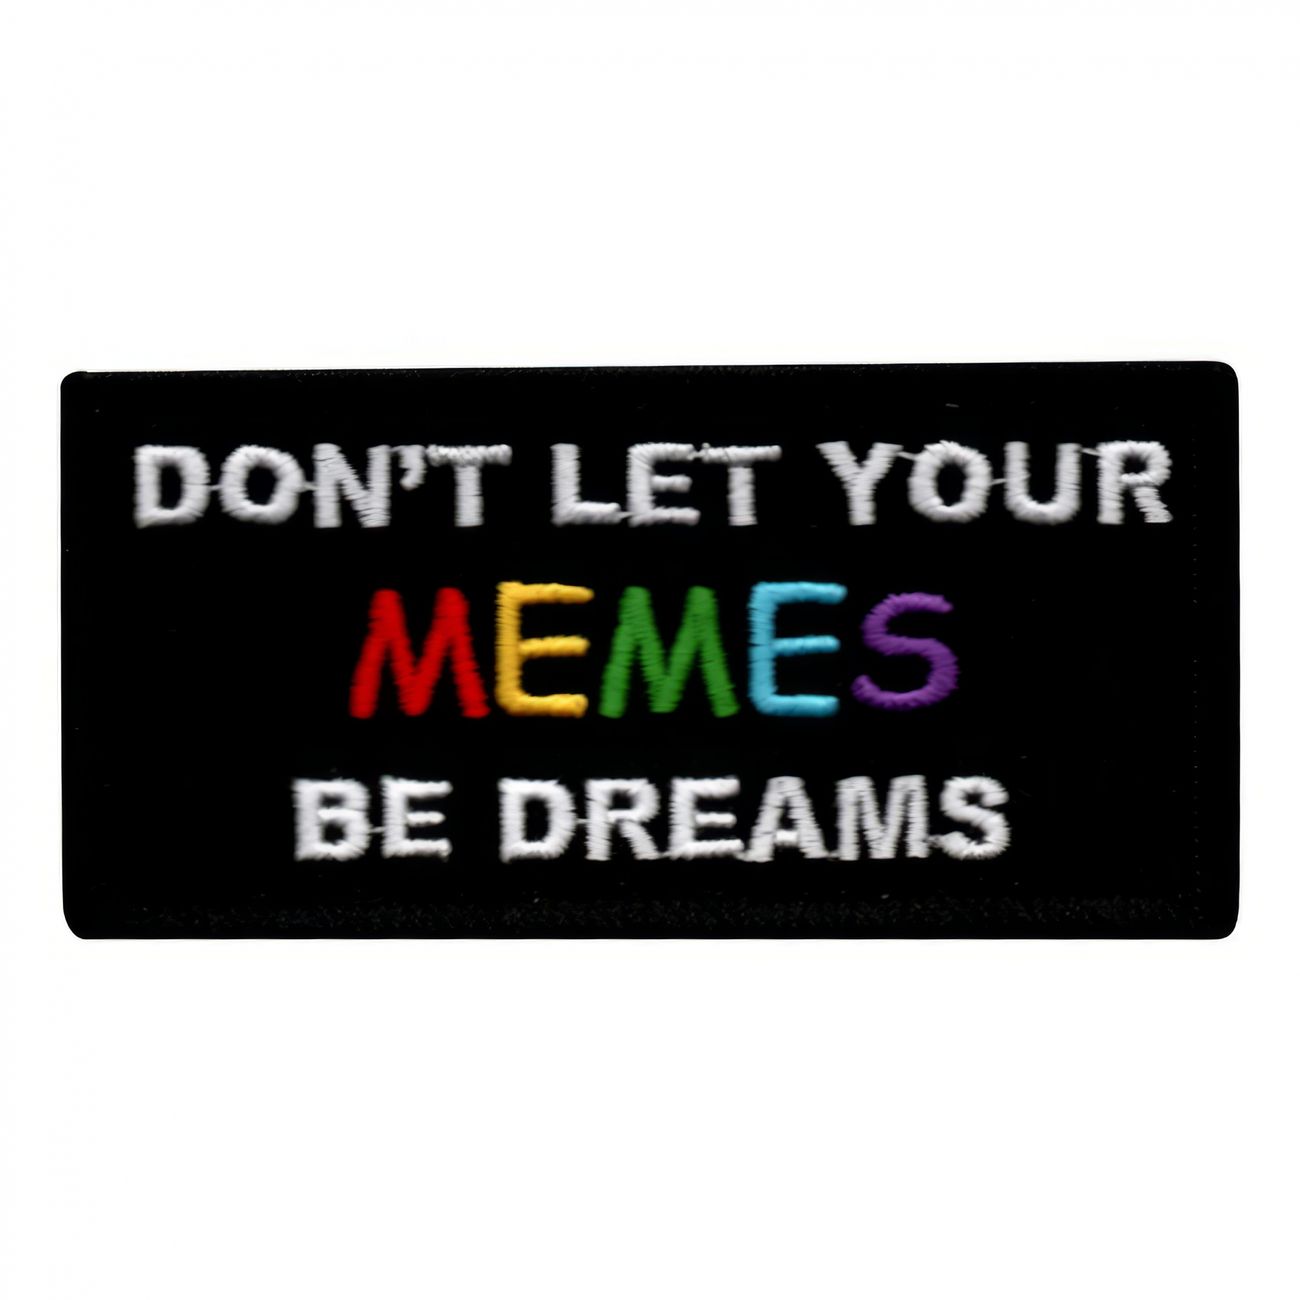 tygmarke-dont-let-your-memes-be-dreams-a-94630-1